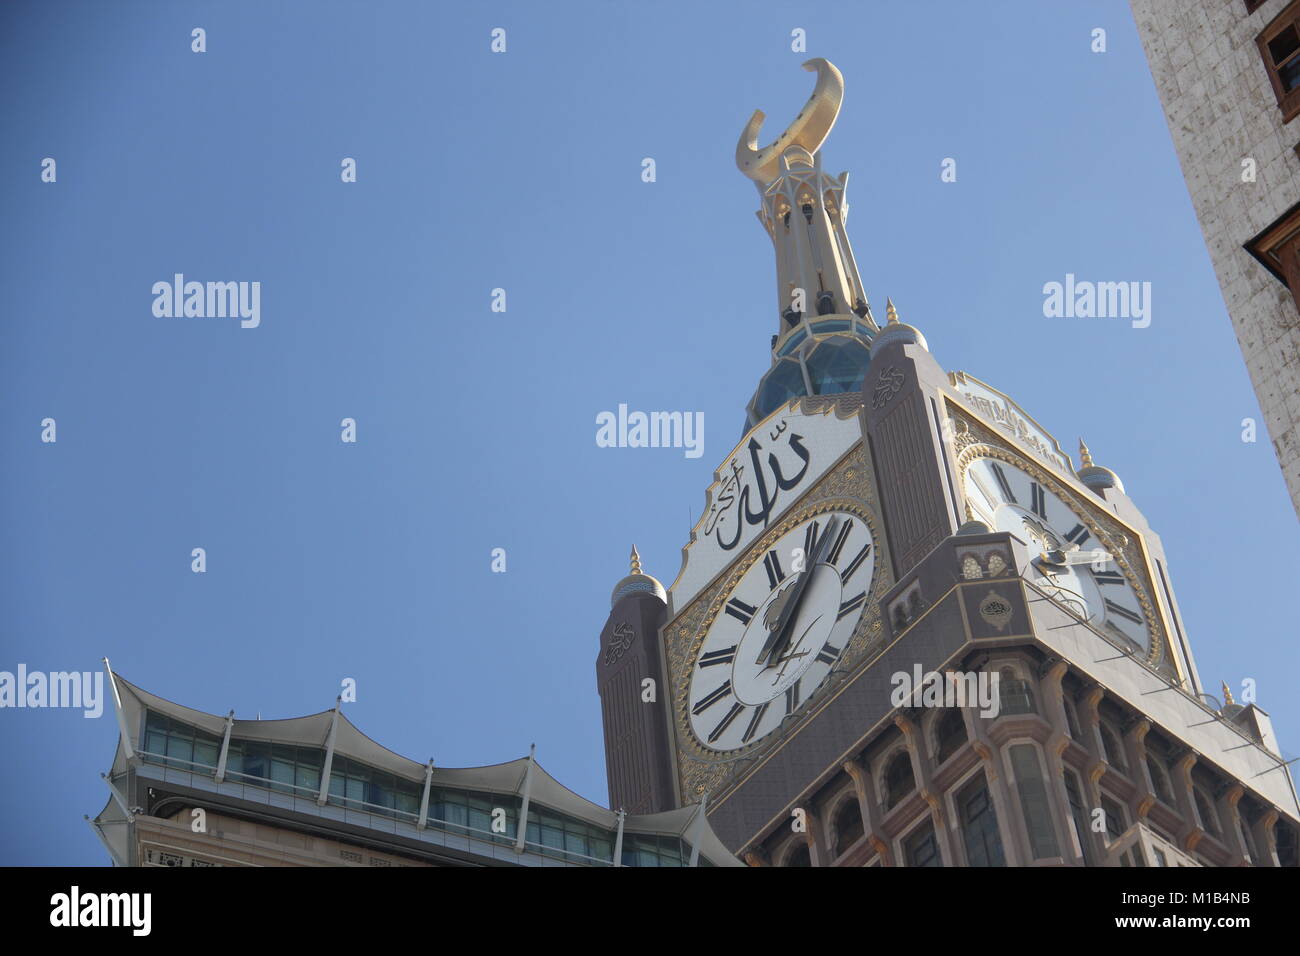 Mecca Royal Clock Tower is one part of the building of the Mecca Royal Clock Tower hotel - Fairmont Hotel and included in the Abraj al Bait complex. Stock Photo